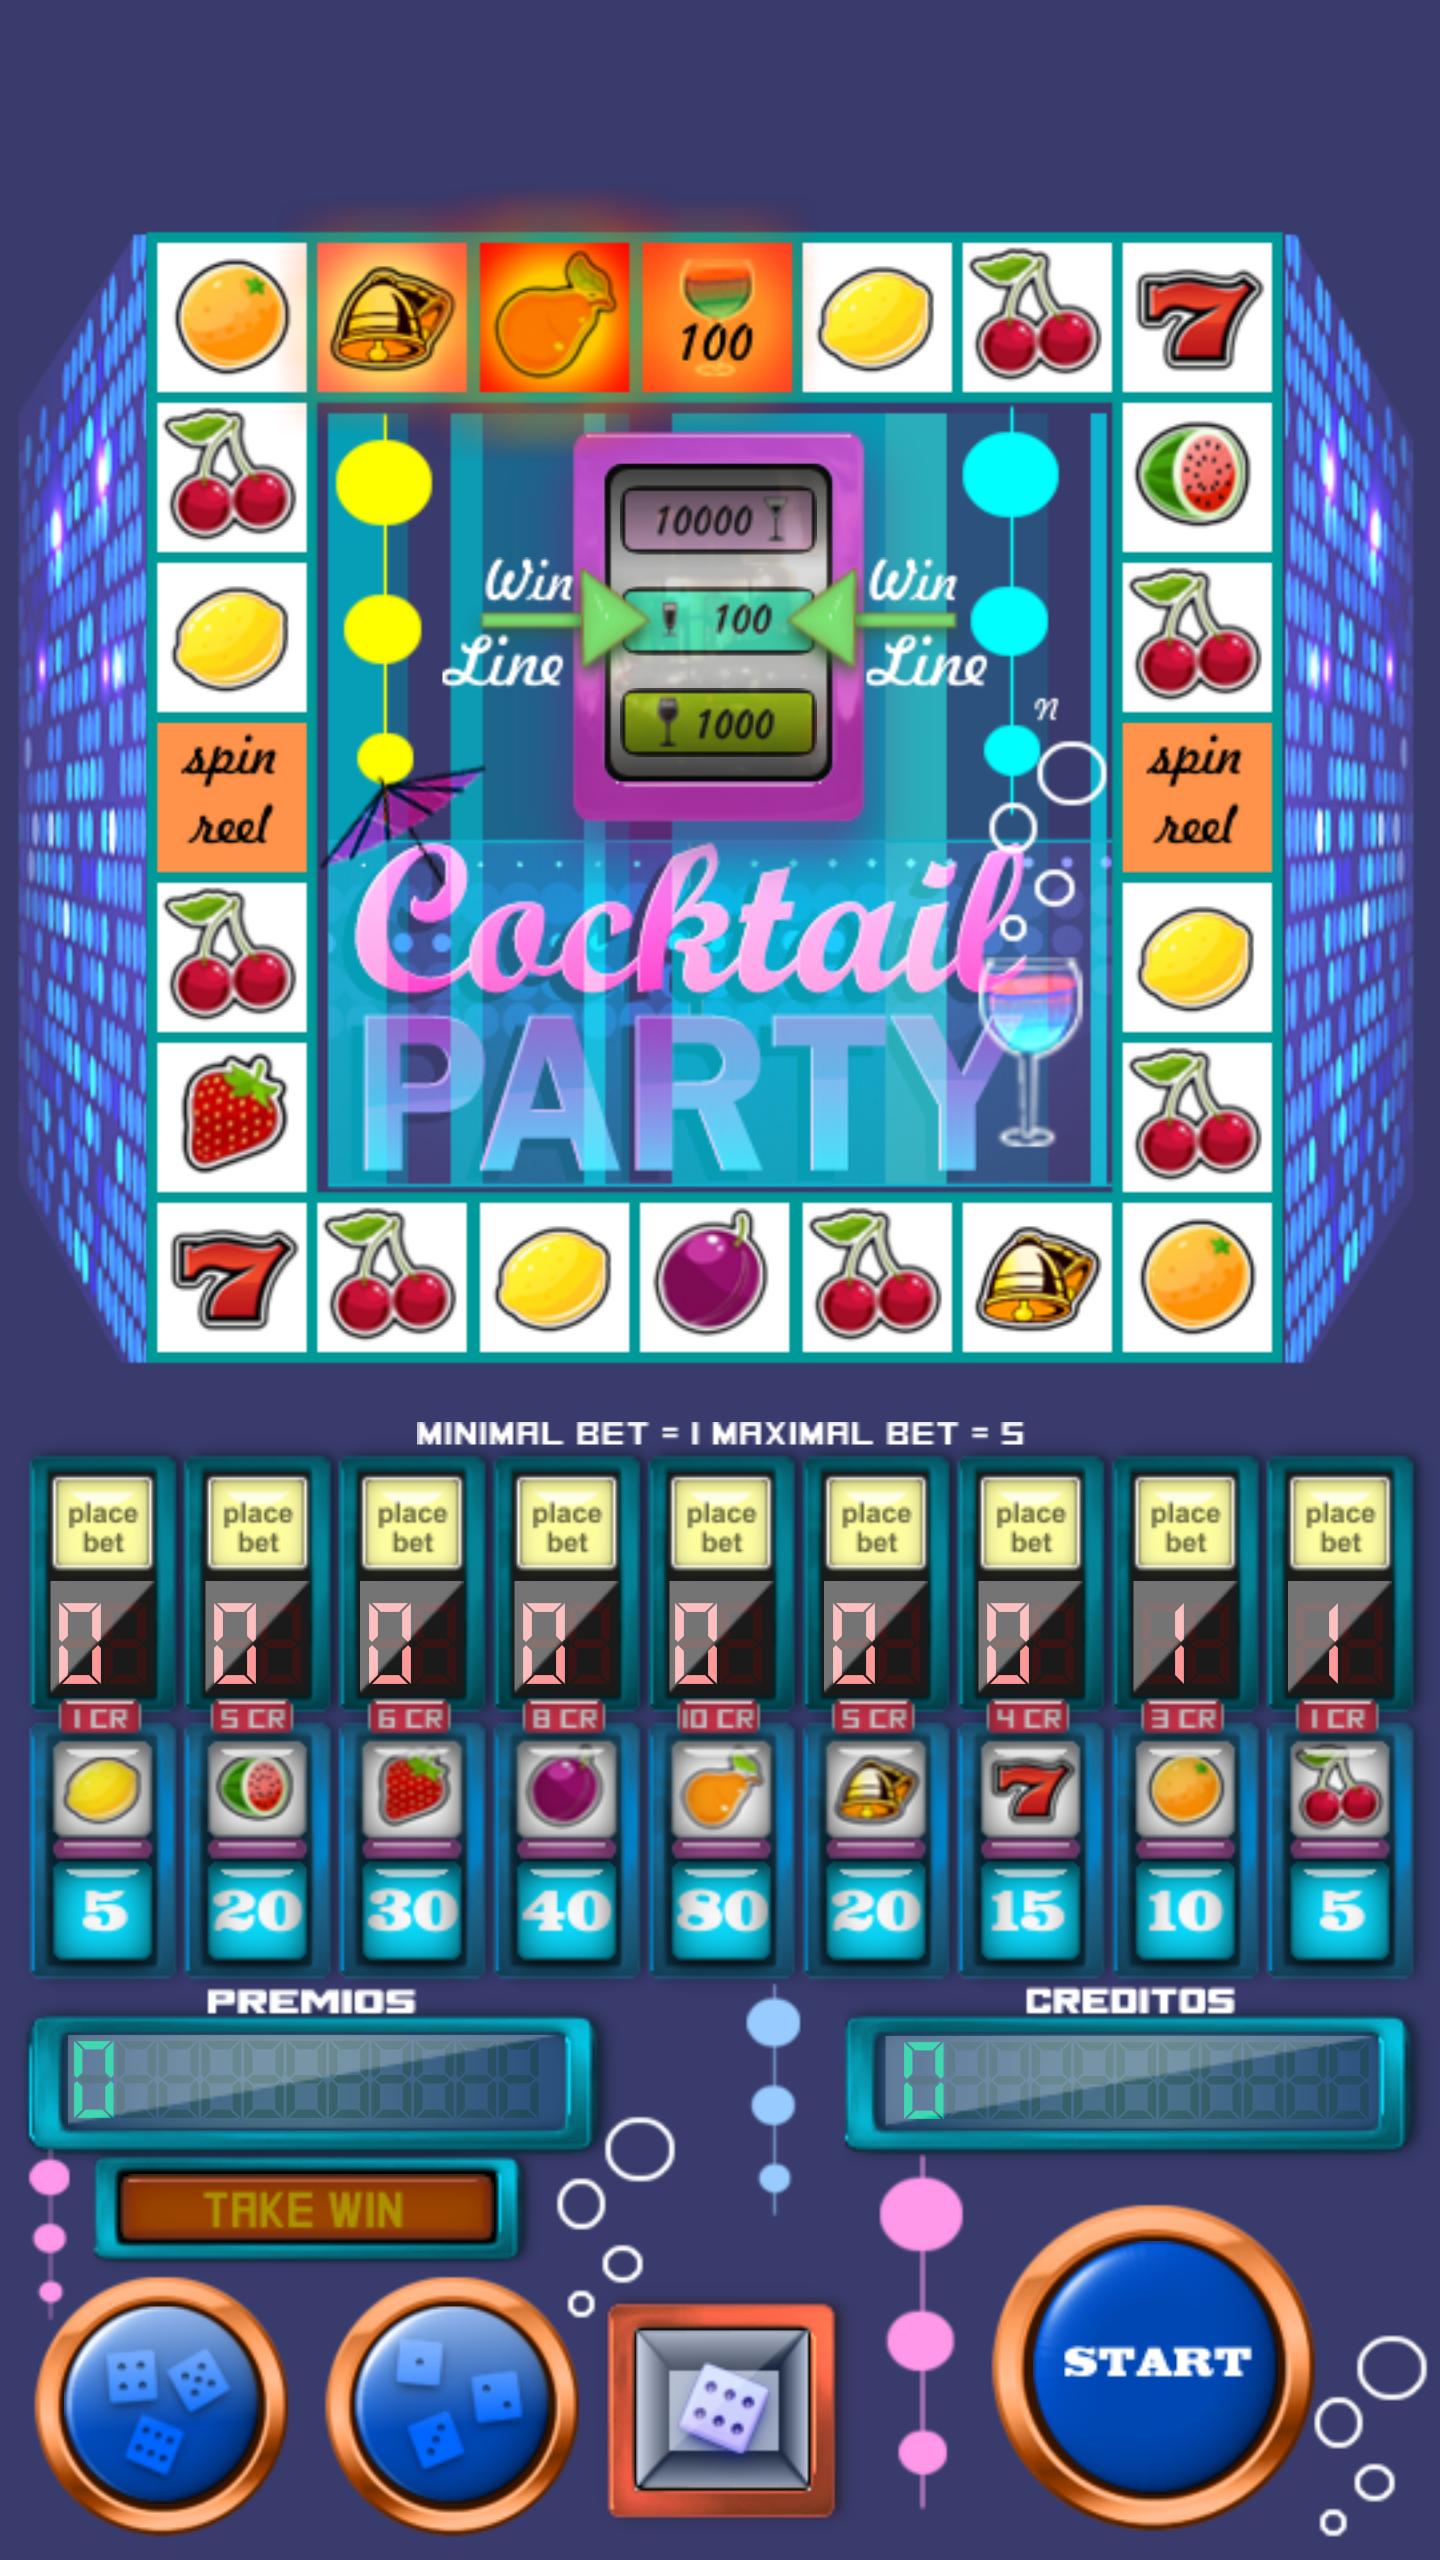 Cocktail price at slot machine brian christopher